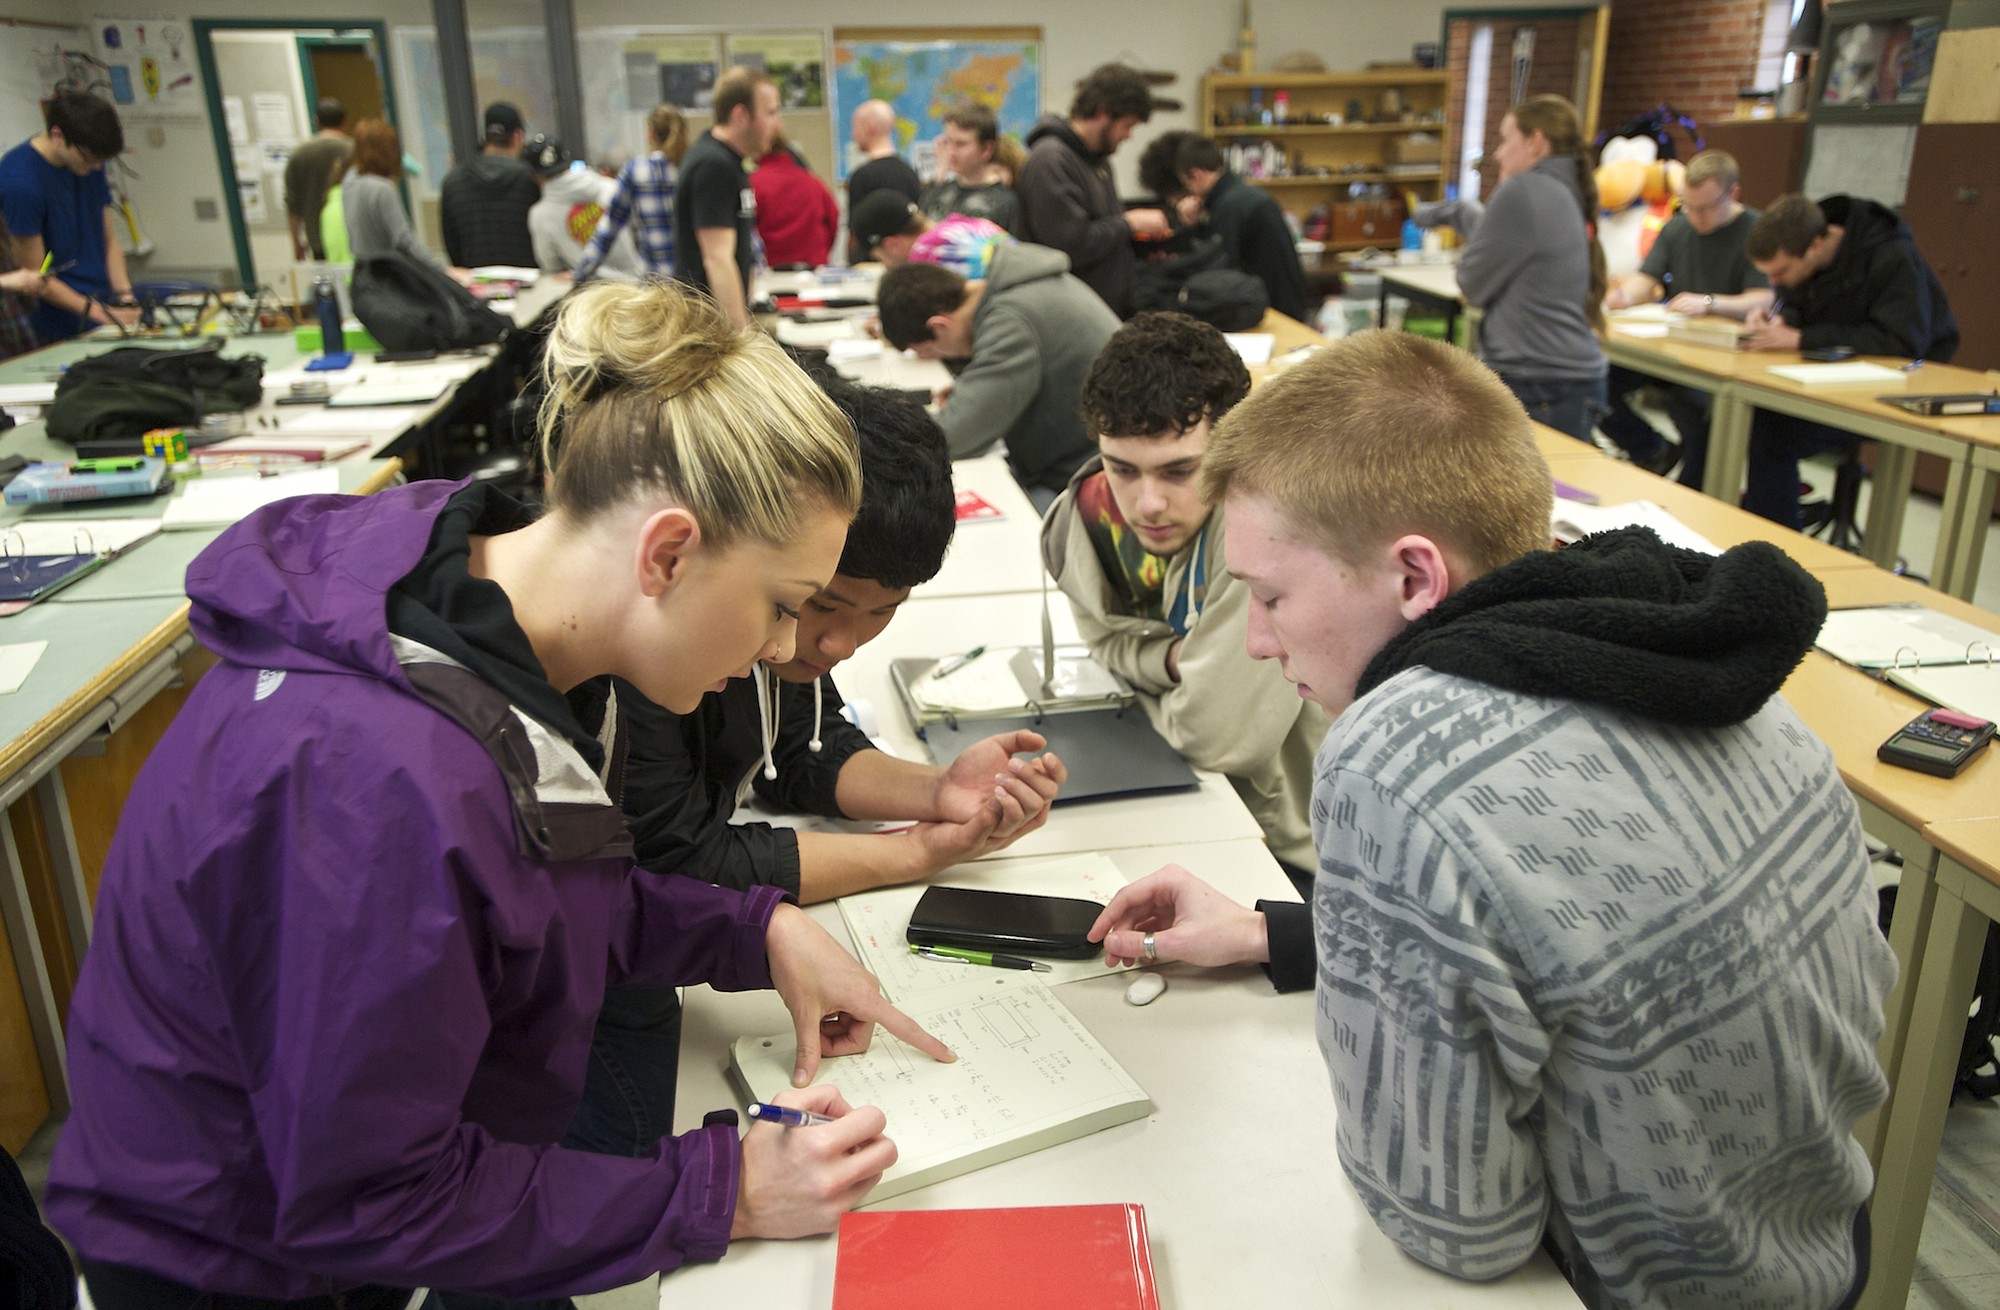 Veronique Johnson, 26, of Vancouver, from left, leads team members -- Seunghyun Roh, 20, of Vancouver, Sam Scofield, 19, of Battle Ground, and Ryan Medick, 19, of Vancouver -- through a lesson in material strength at Clark College.